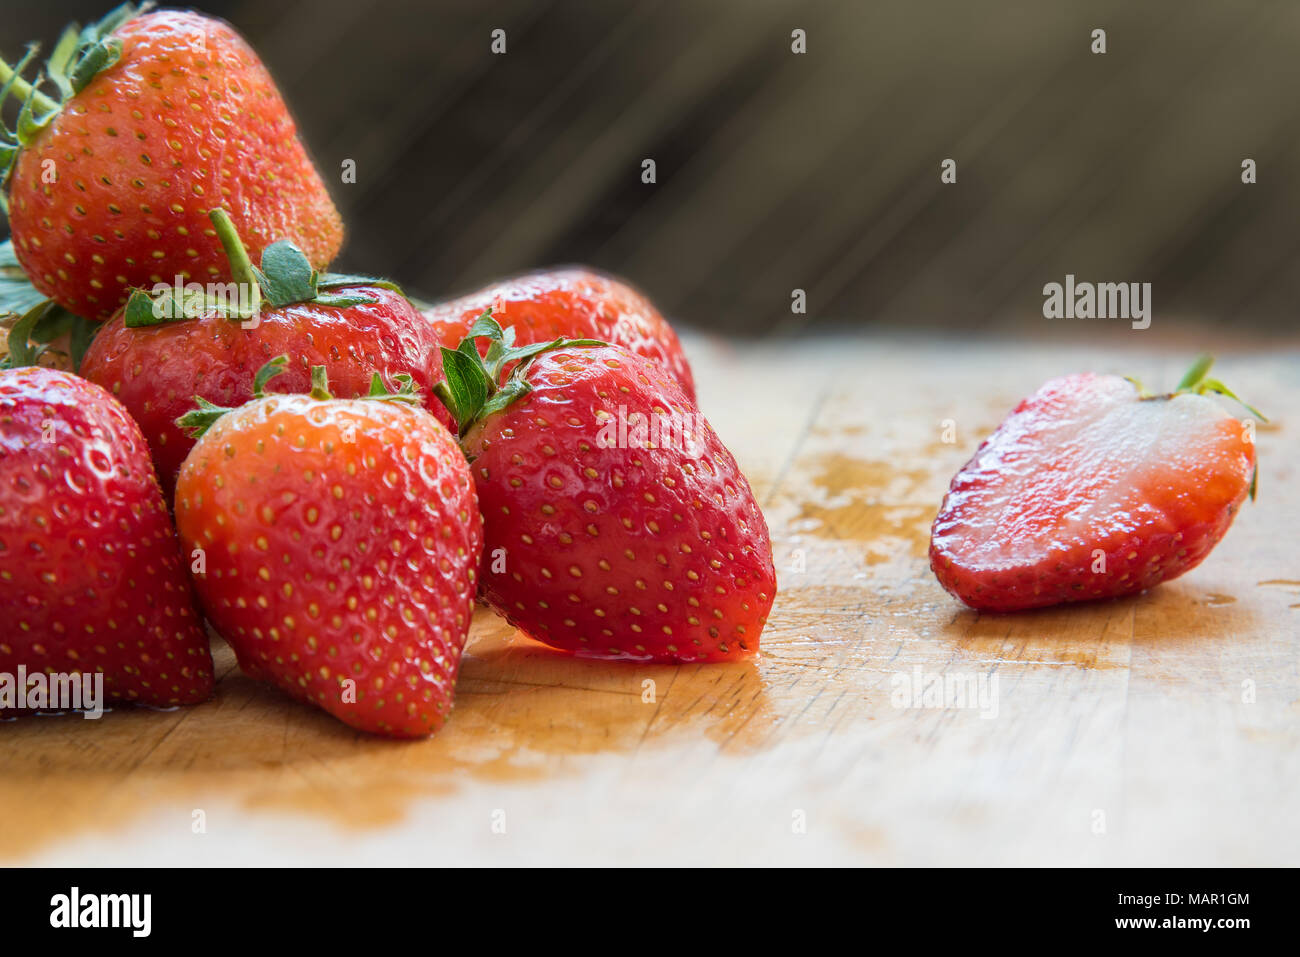 Strawberries on wooden table, with light rays, Fruit and food concept Stock Photo